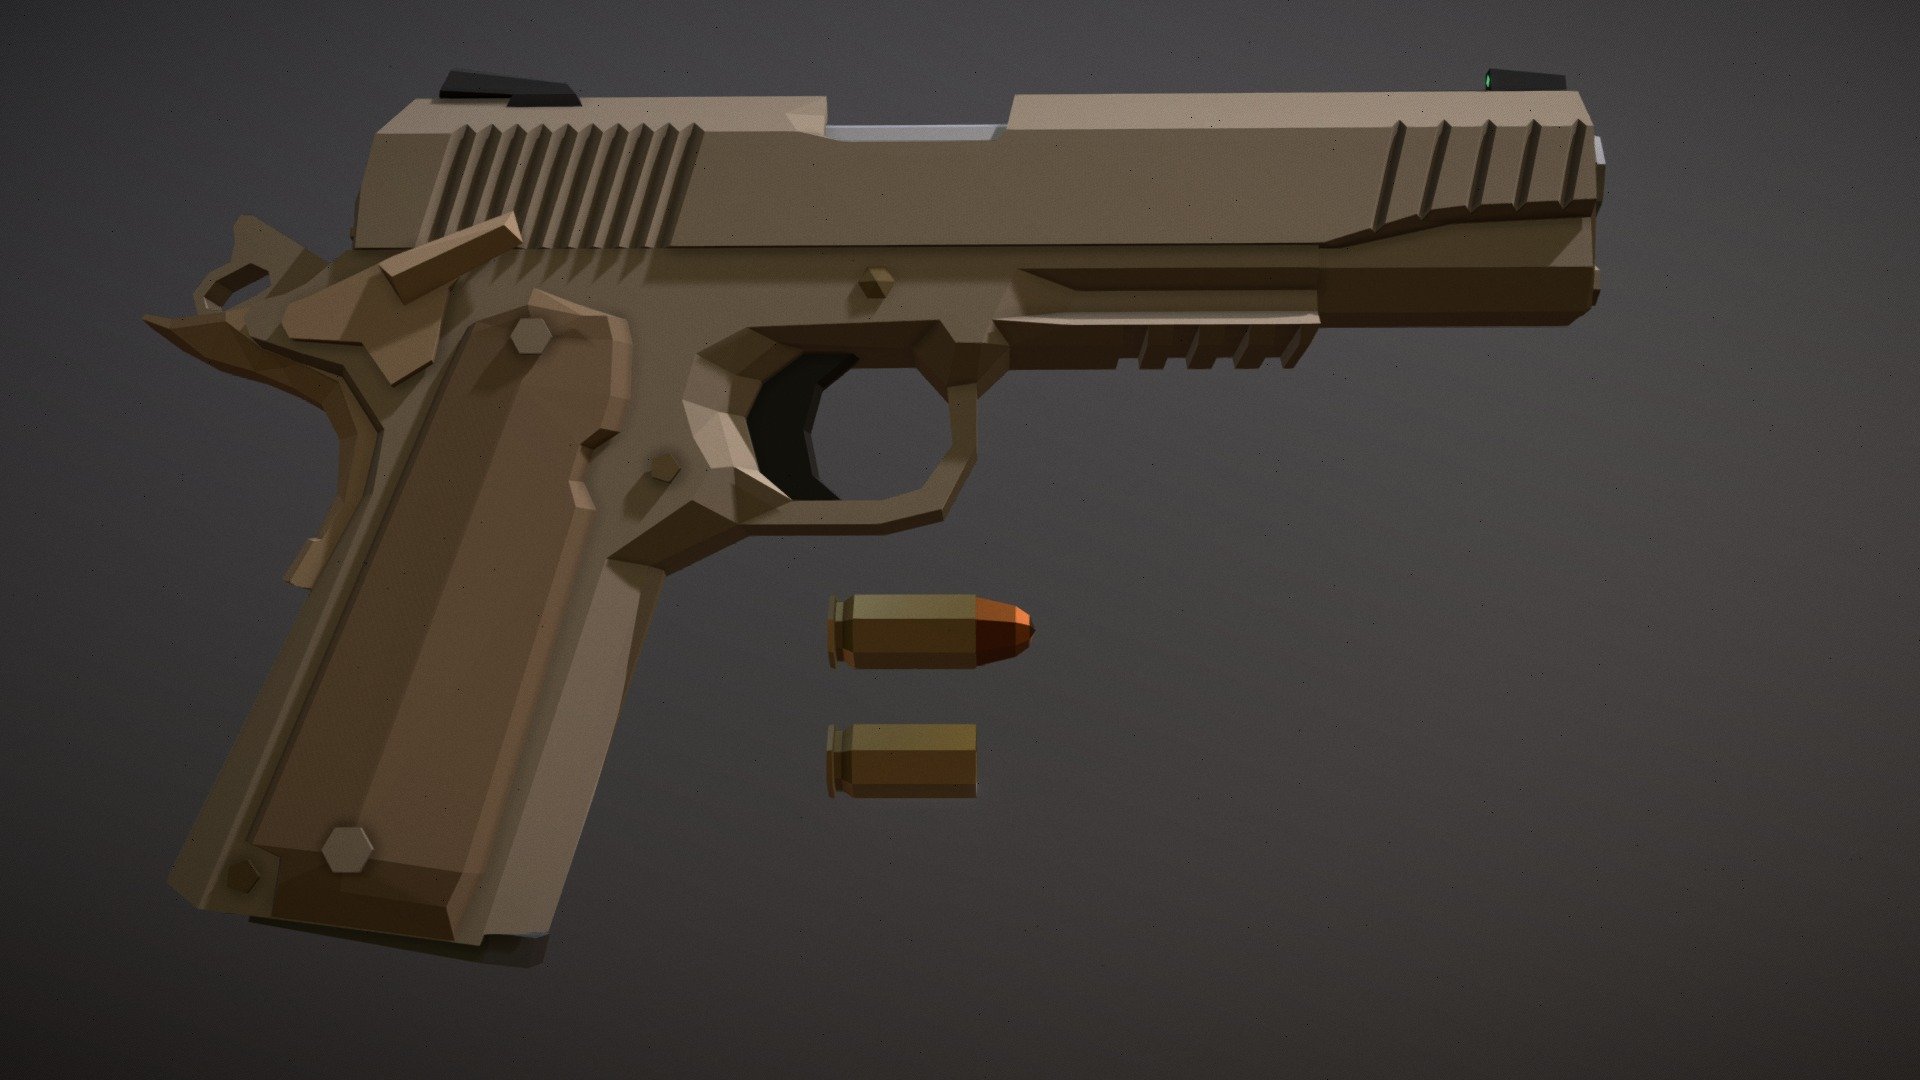 This is a modernized variant of the Colt 1911, adopted by the US Marine Corps, specifically the Marine Expeditionary unit and Force Recon, as these units disliked the newly adopted Beretta M9, instead preferring a 1911 Chambered in .45 ACP. Due to this, an amount of old 1911 pistols were modernized using components from the civilian market, and were then (re-) adopted as the M45A1.

This pistol has a seven round magazine, a short attachment rail on the front as well as night sights and a set of grip plates that have a colour pattern I did not bother to include 3d model